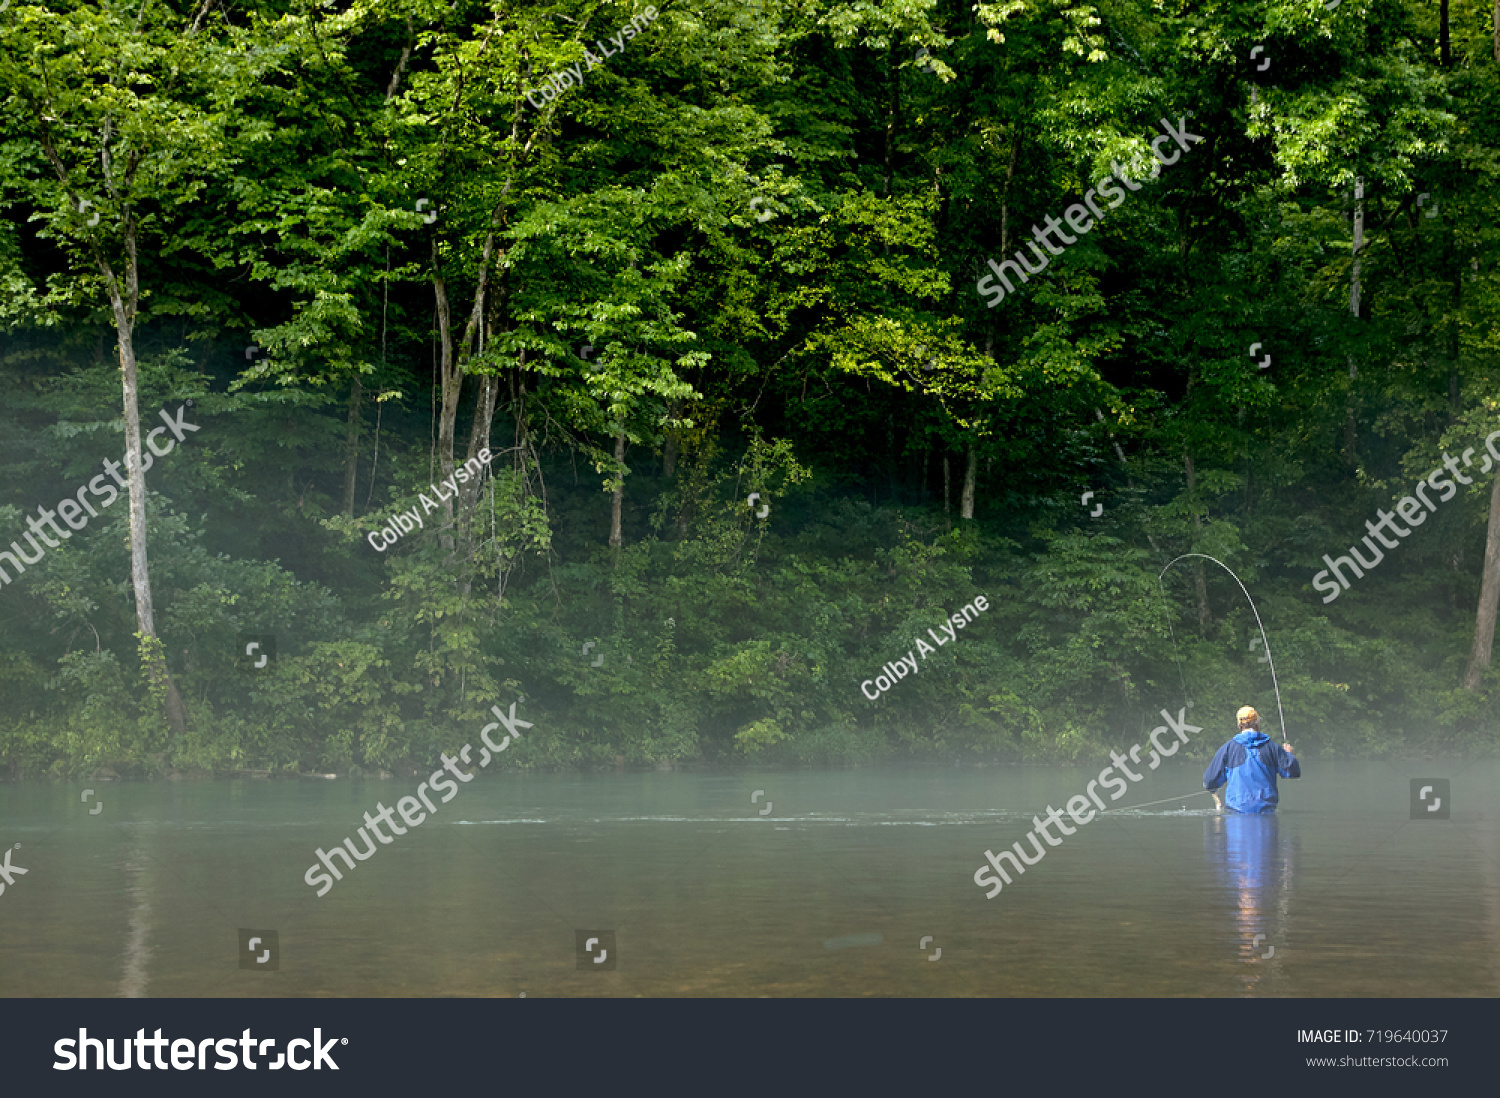 Fisherman fly fishing in a misty Eleven Point River, Missouri in the early morning standing waist deep in the water with his rod in a lush green environment #719640037